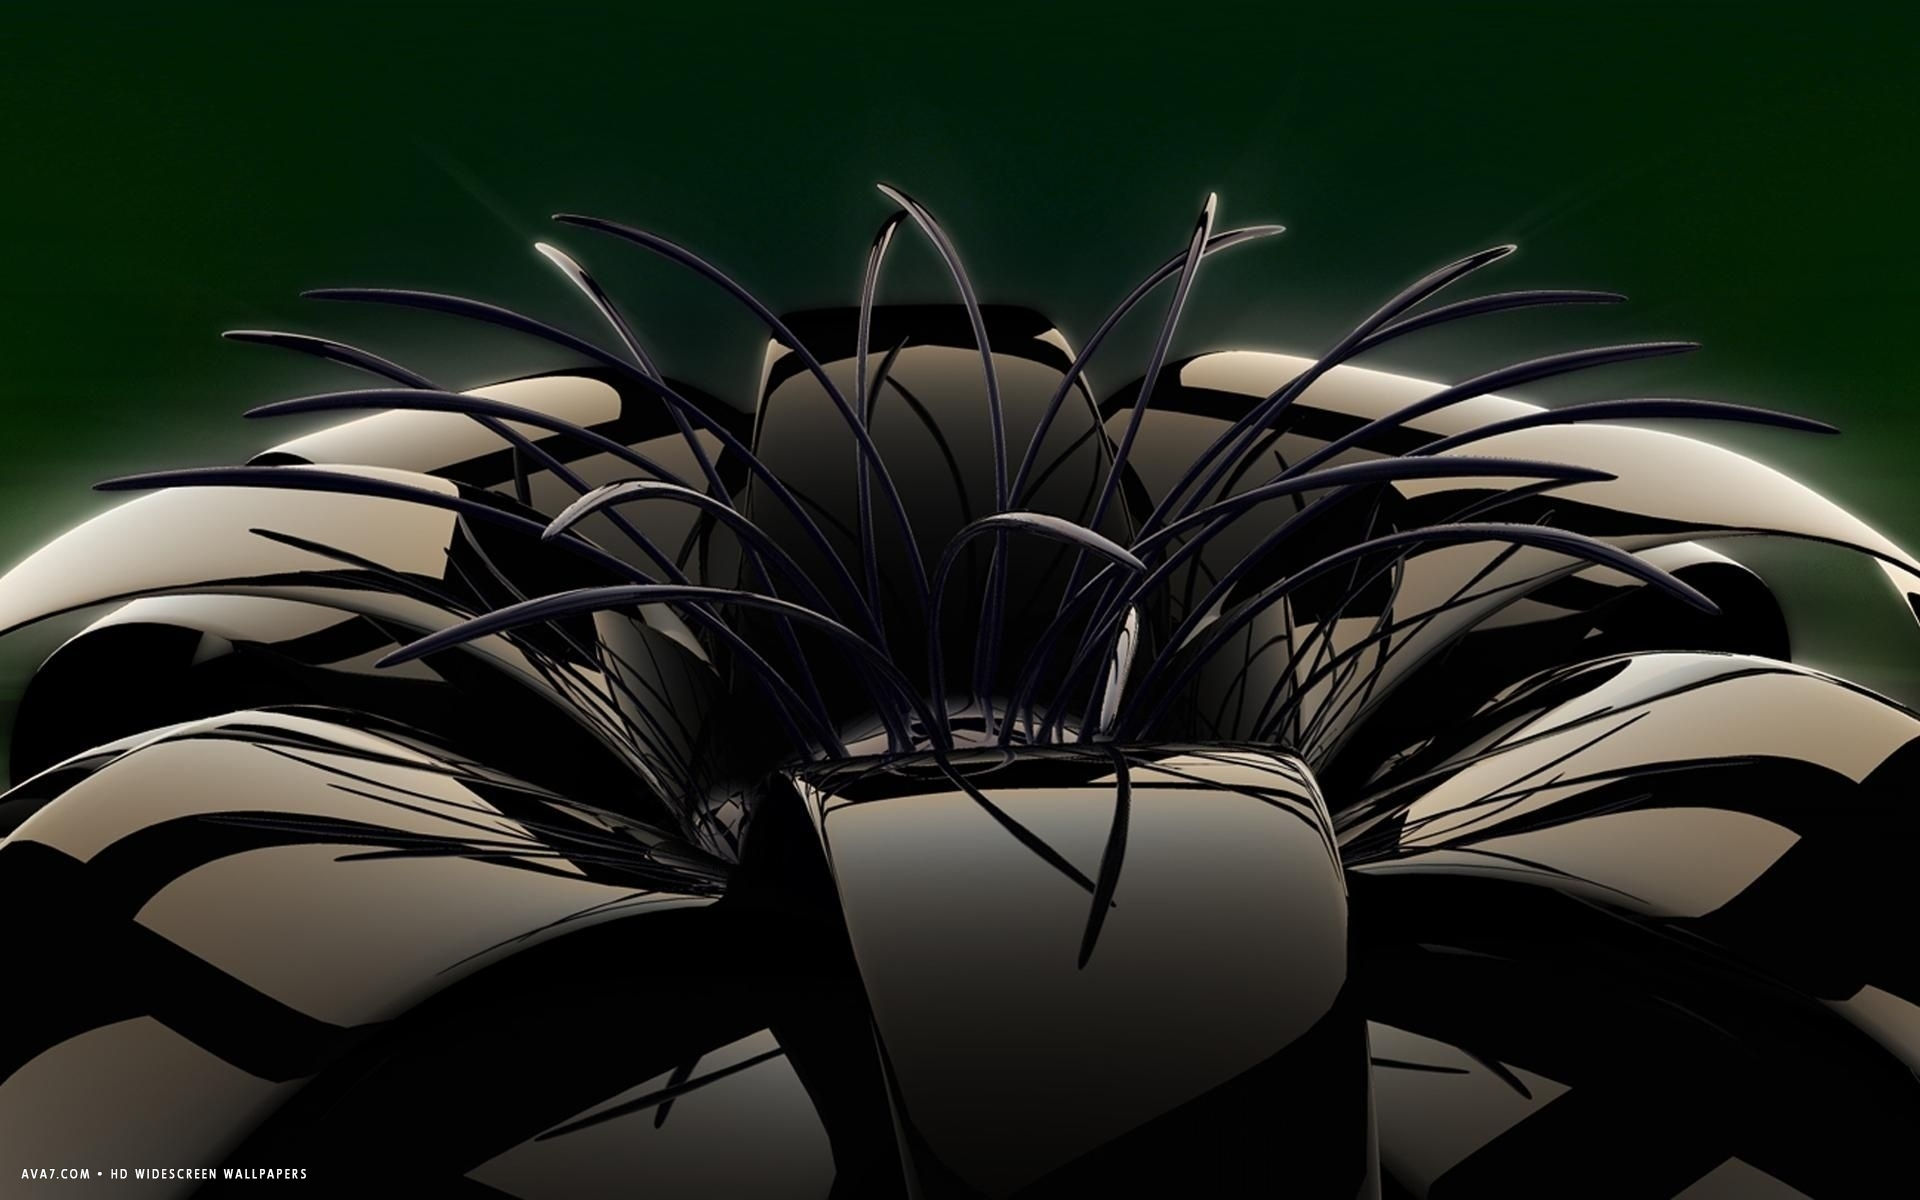 3d background wallpaper,plant,botany,graphic design,darkness,architecture